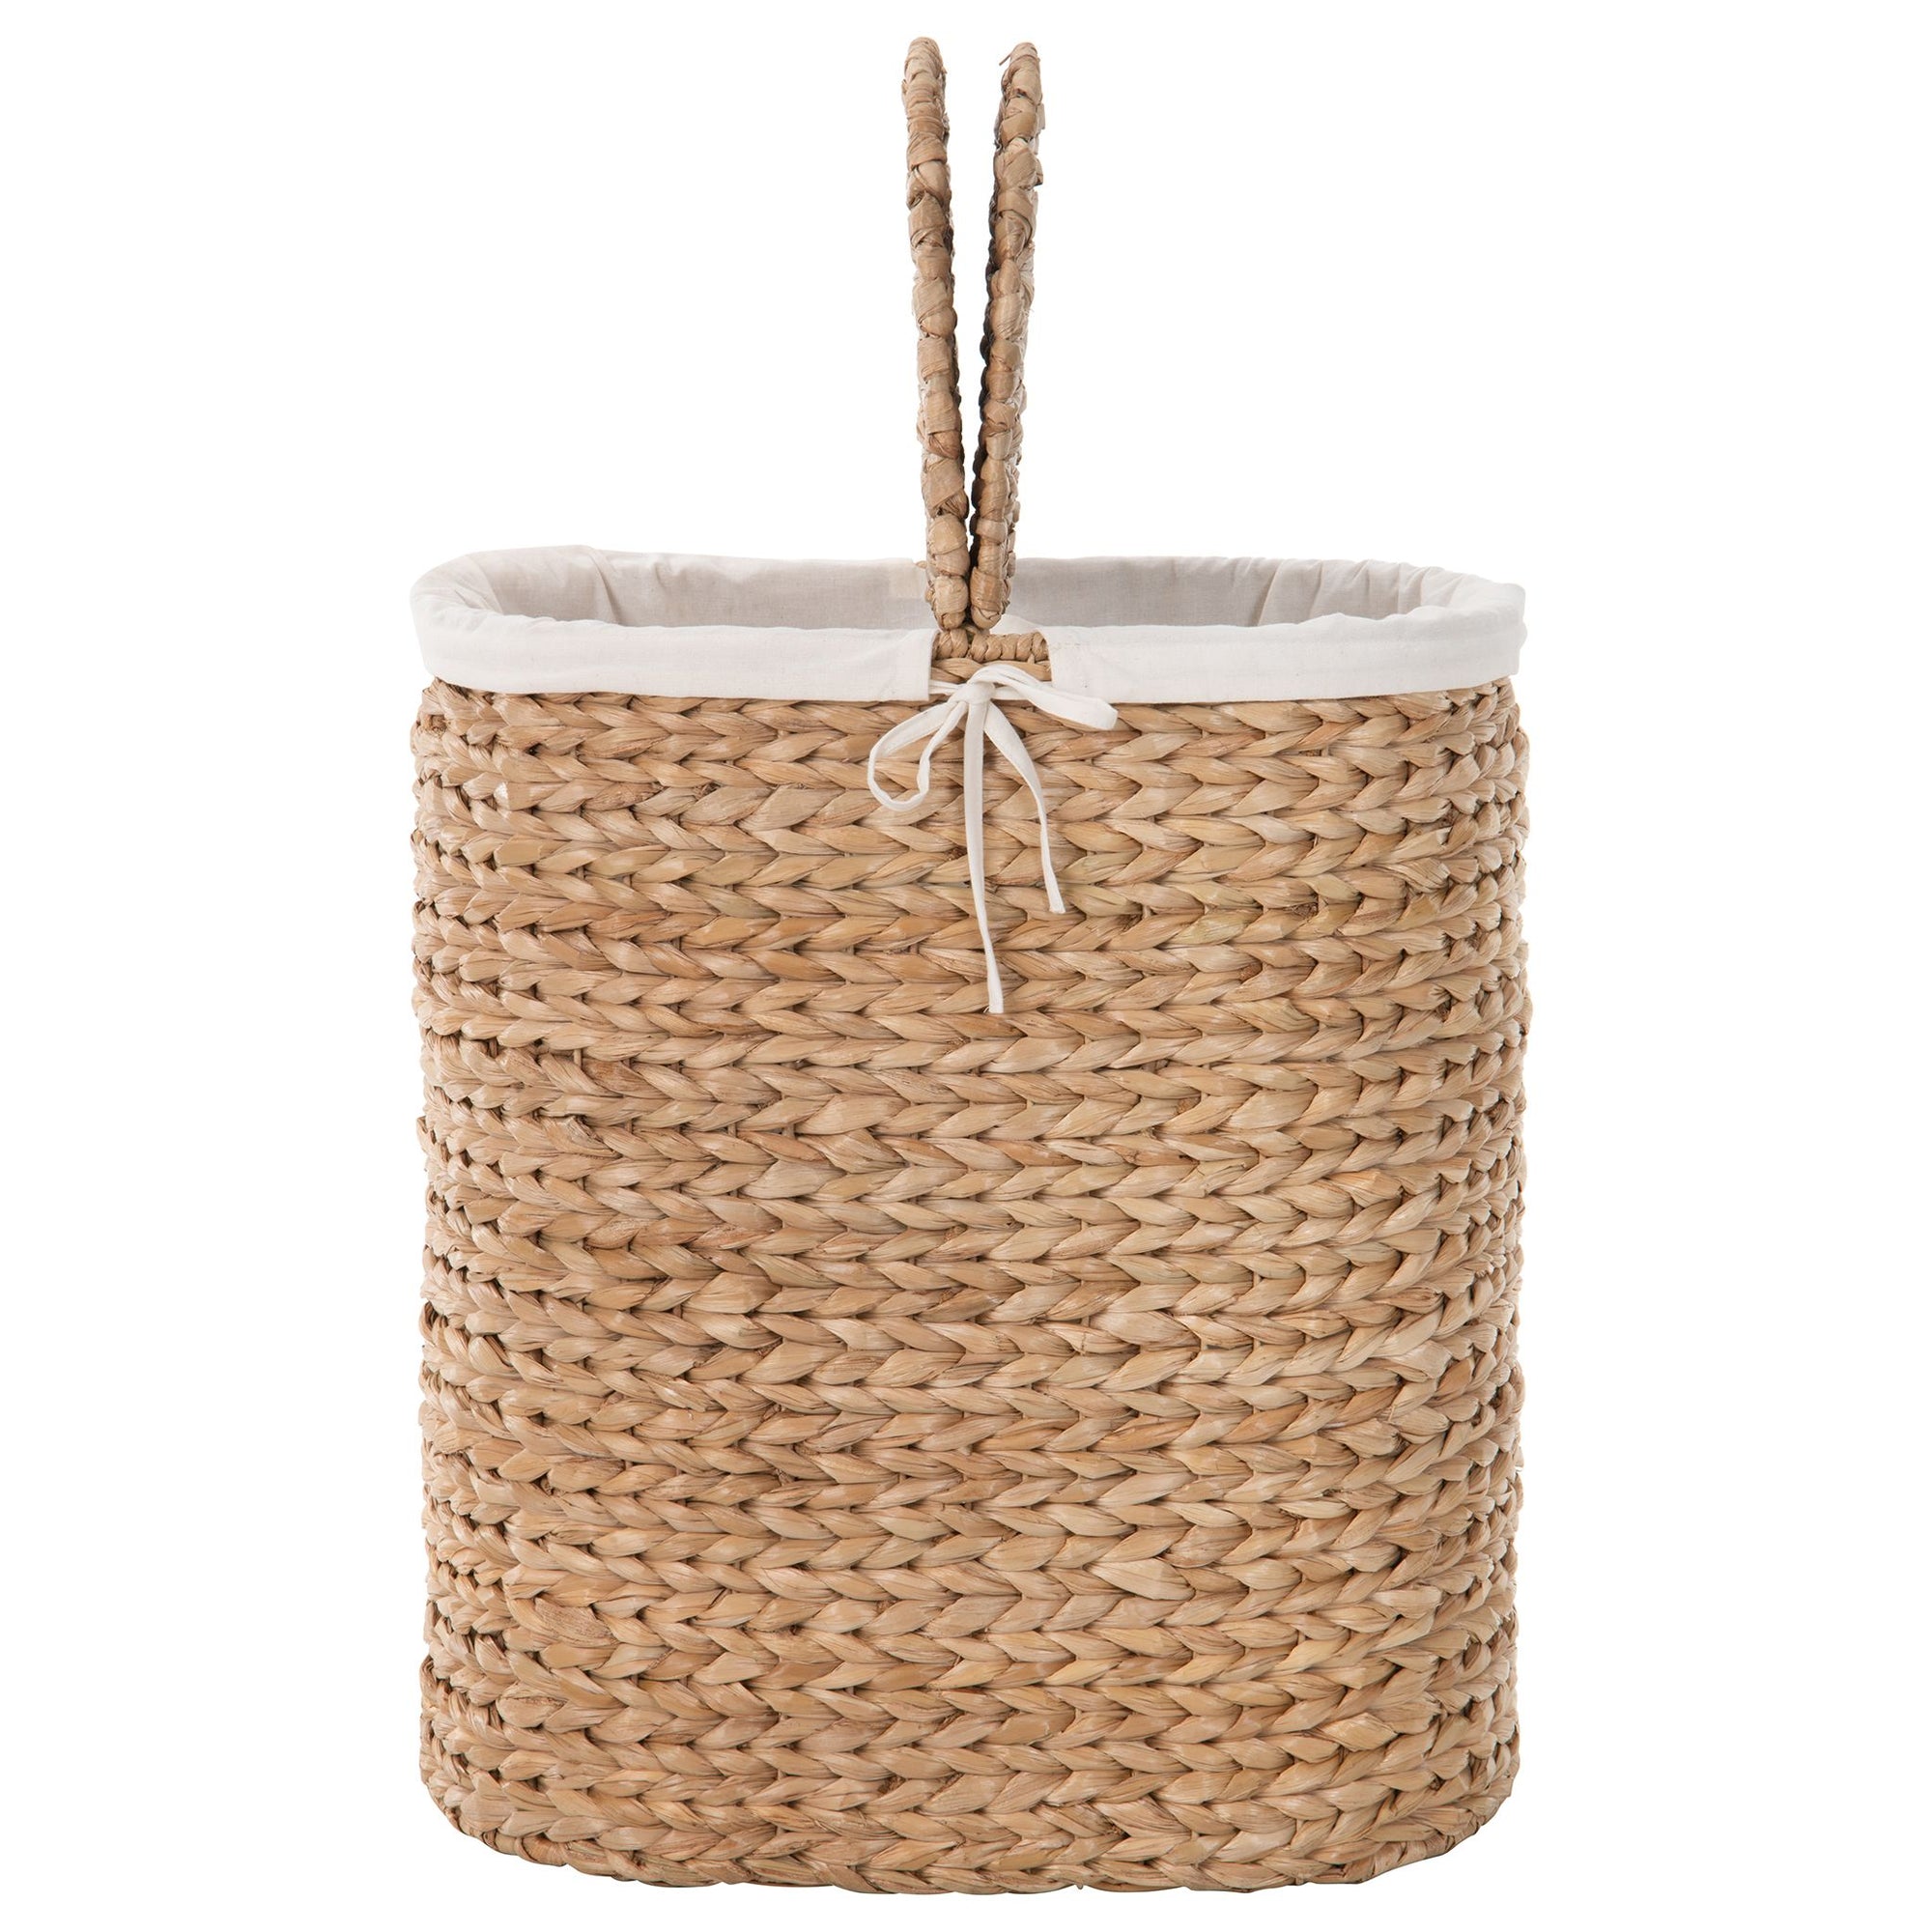 Sea Grass Half Moon Hamper and Laundry Basket with Removable Liner, Na